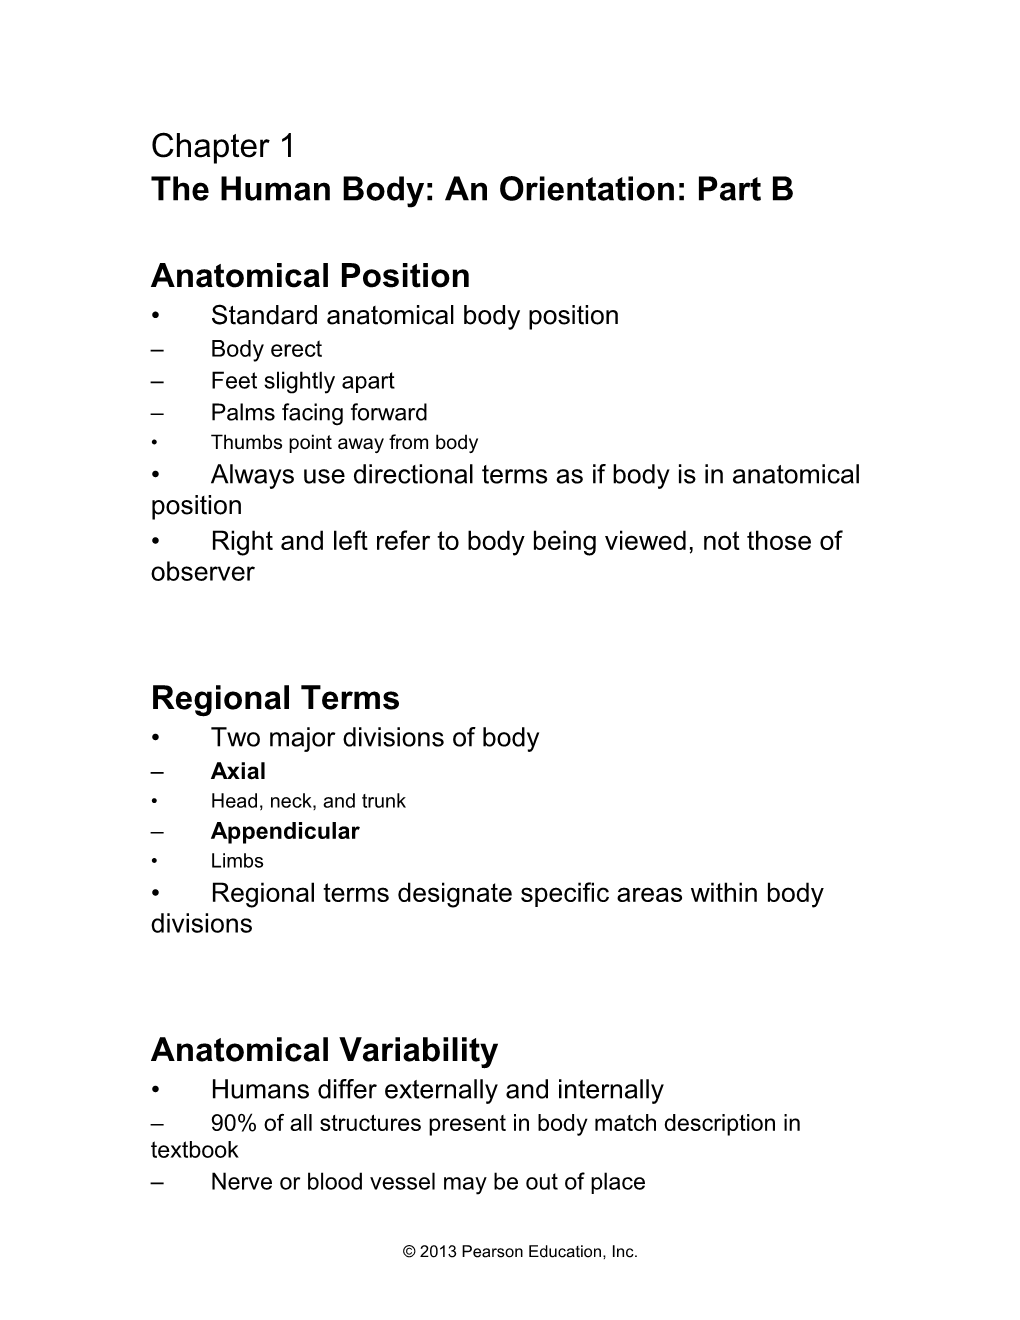 Overview of Anatomy and Physiology